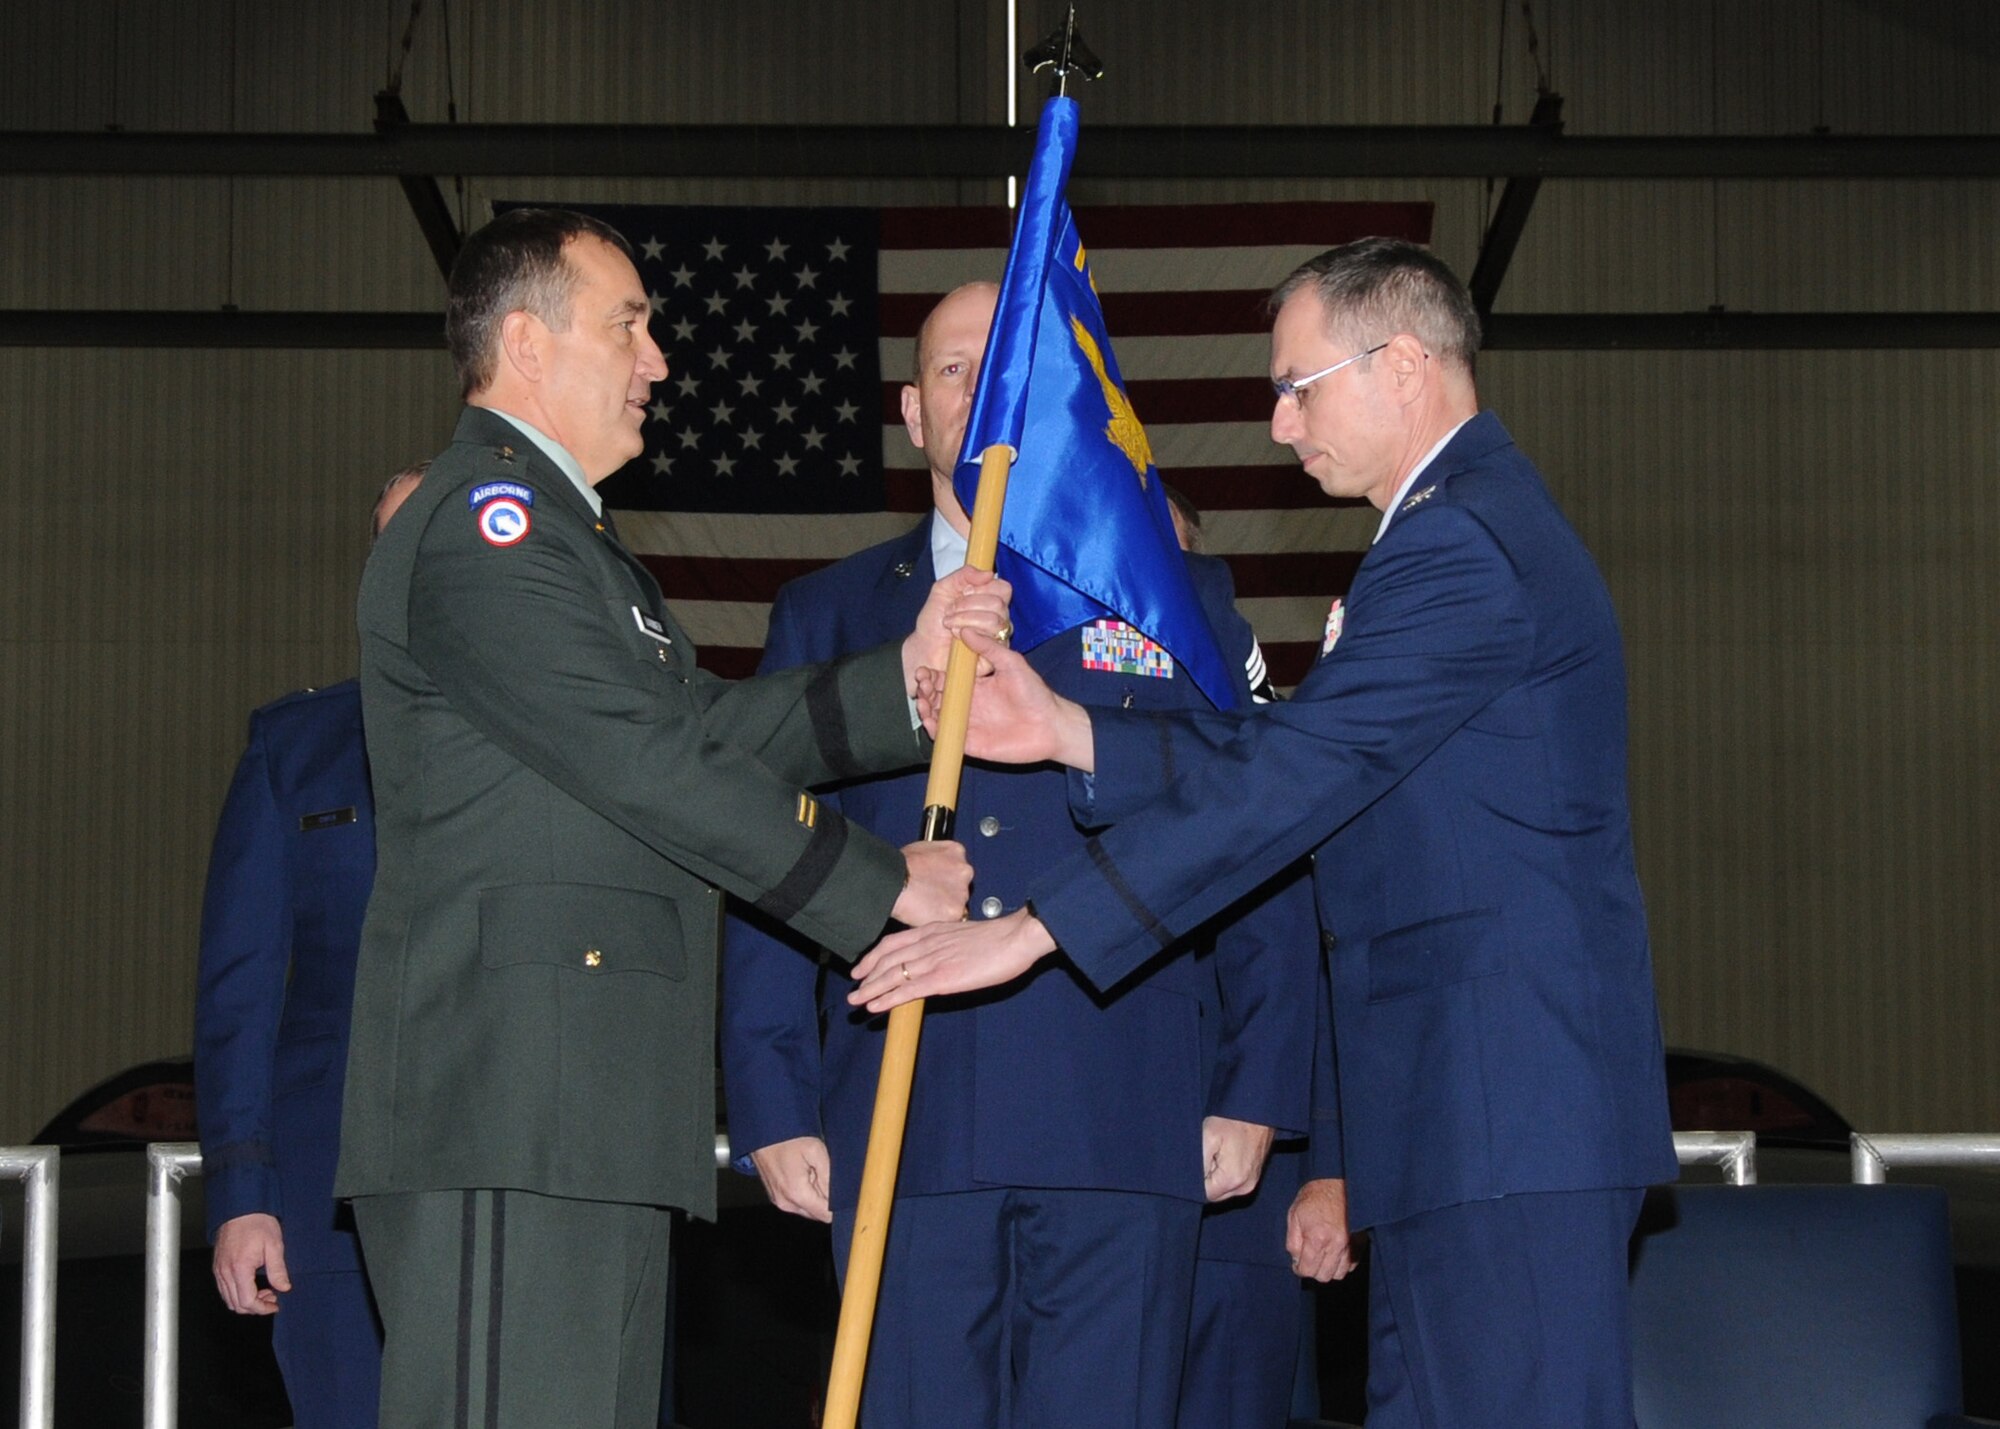 Col. Gregory Champagne, 131st Bomb Wing Commander, Missouri Air National Guard, accepts the 131st Bomb Wing guidon from Brig. Gen. Stephen Danner, adjutant general of the Missouri National Guard, during his assumption of command ceremony at Whiteman AFB, March 20.  (U.S. Air Force photo by Master Sgt. Mary-Dale Amison  RELEASED)